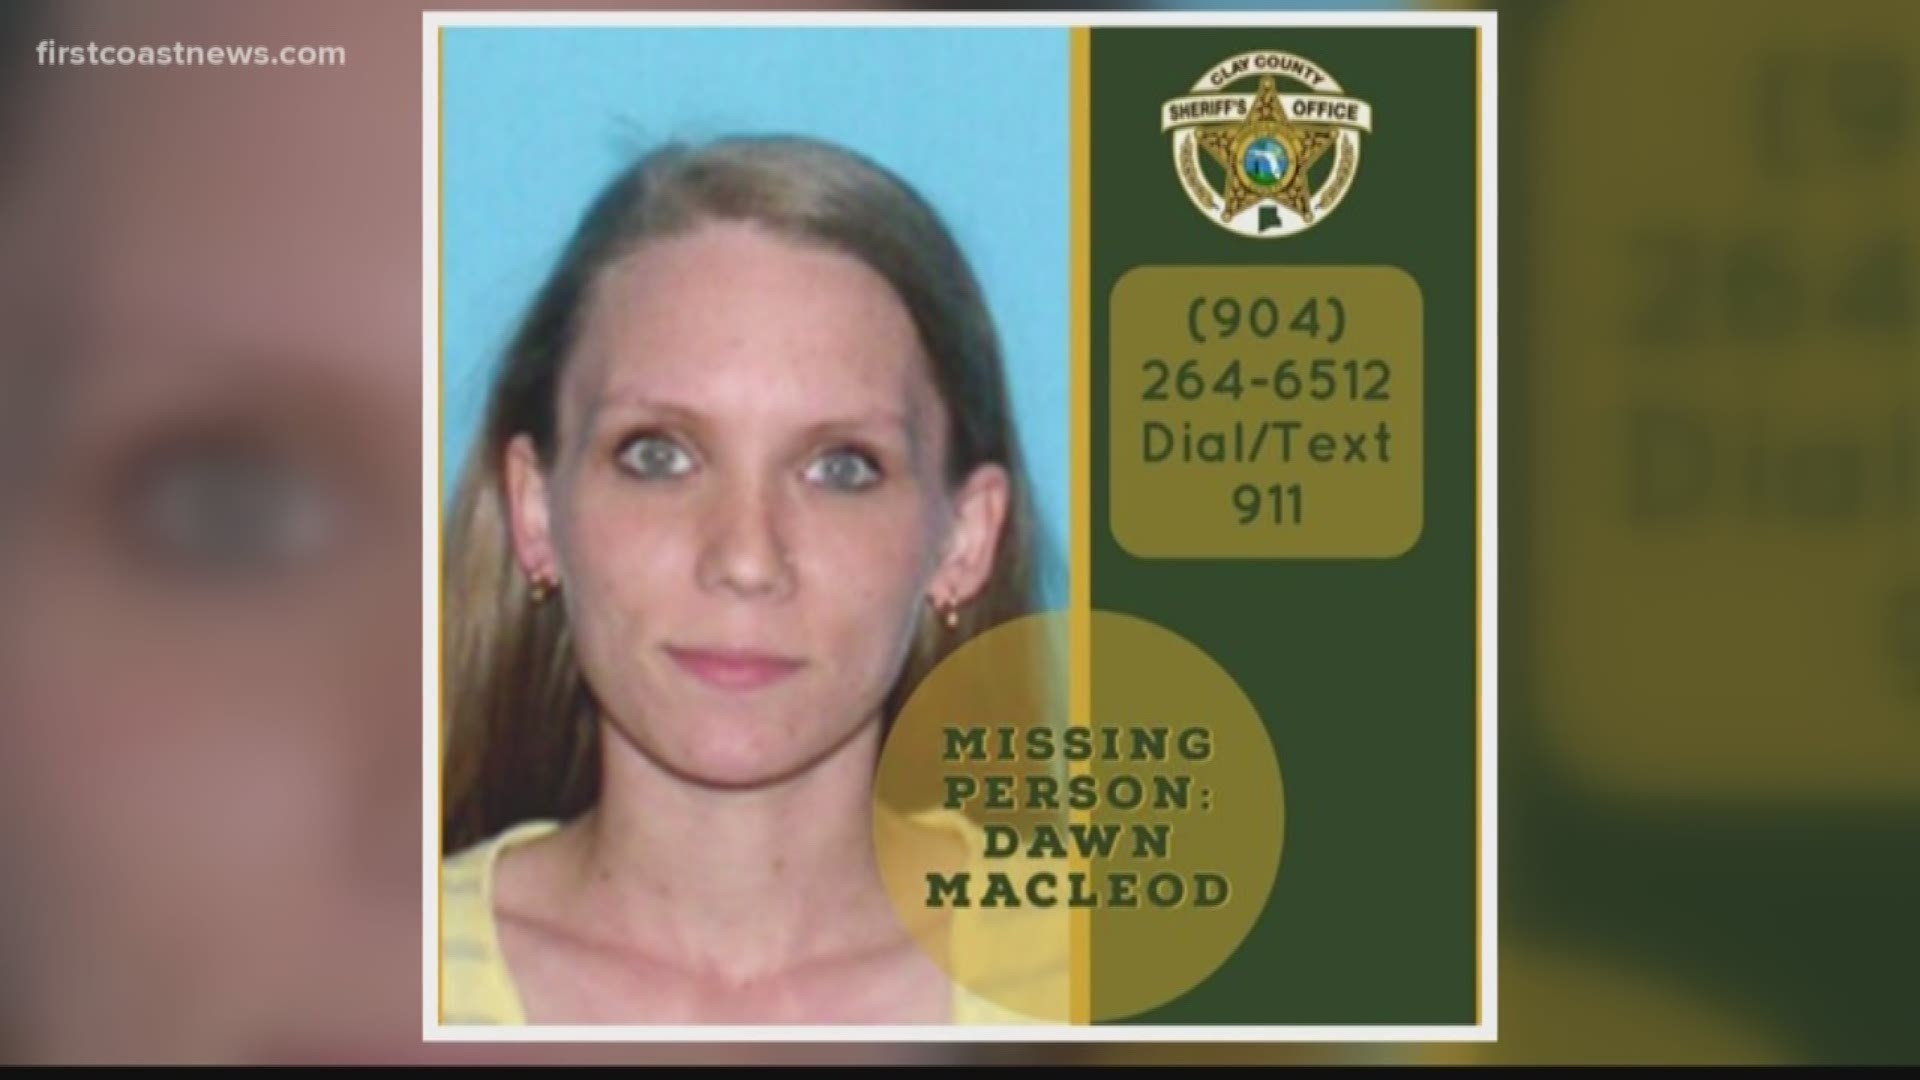 Dawn Macleod may be driving a 2005 gray or silver Honda sport utility vehicle with the Florida license plate LNBD55.